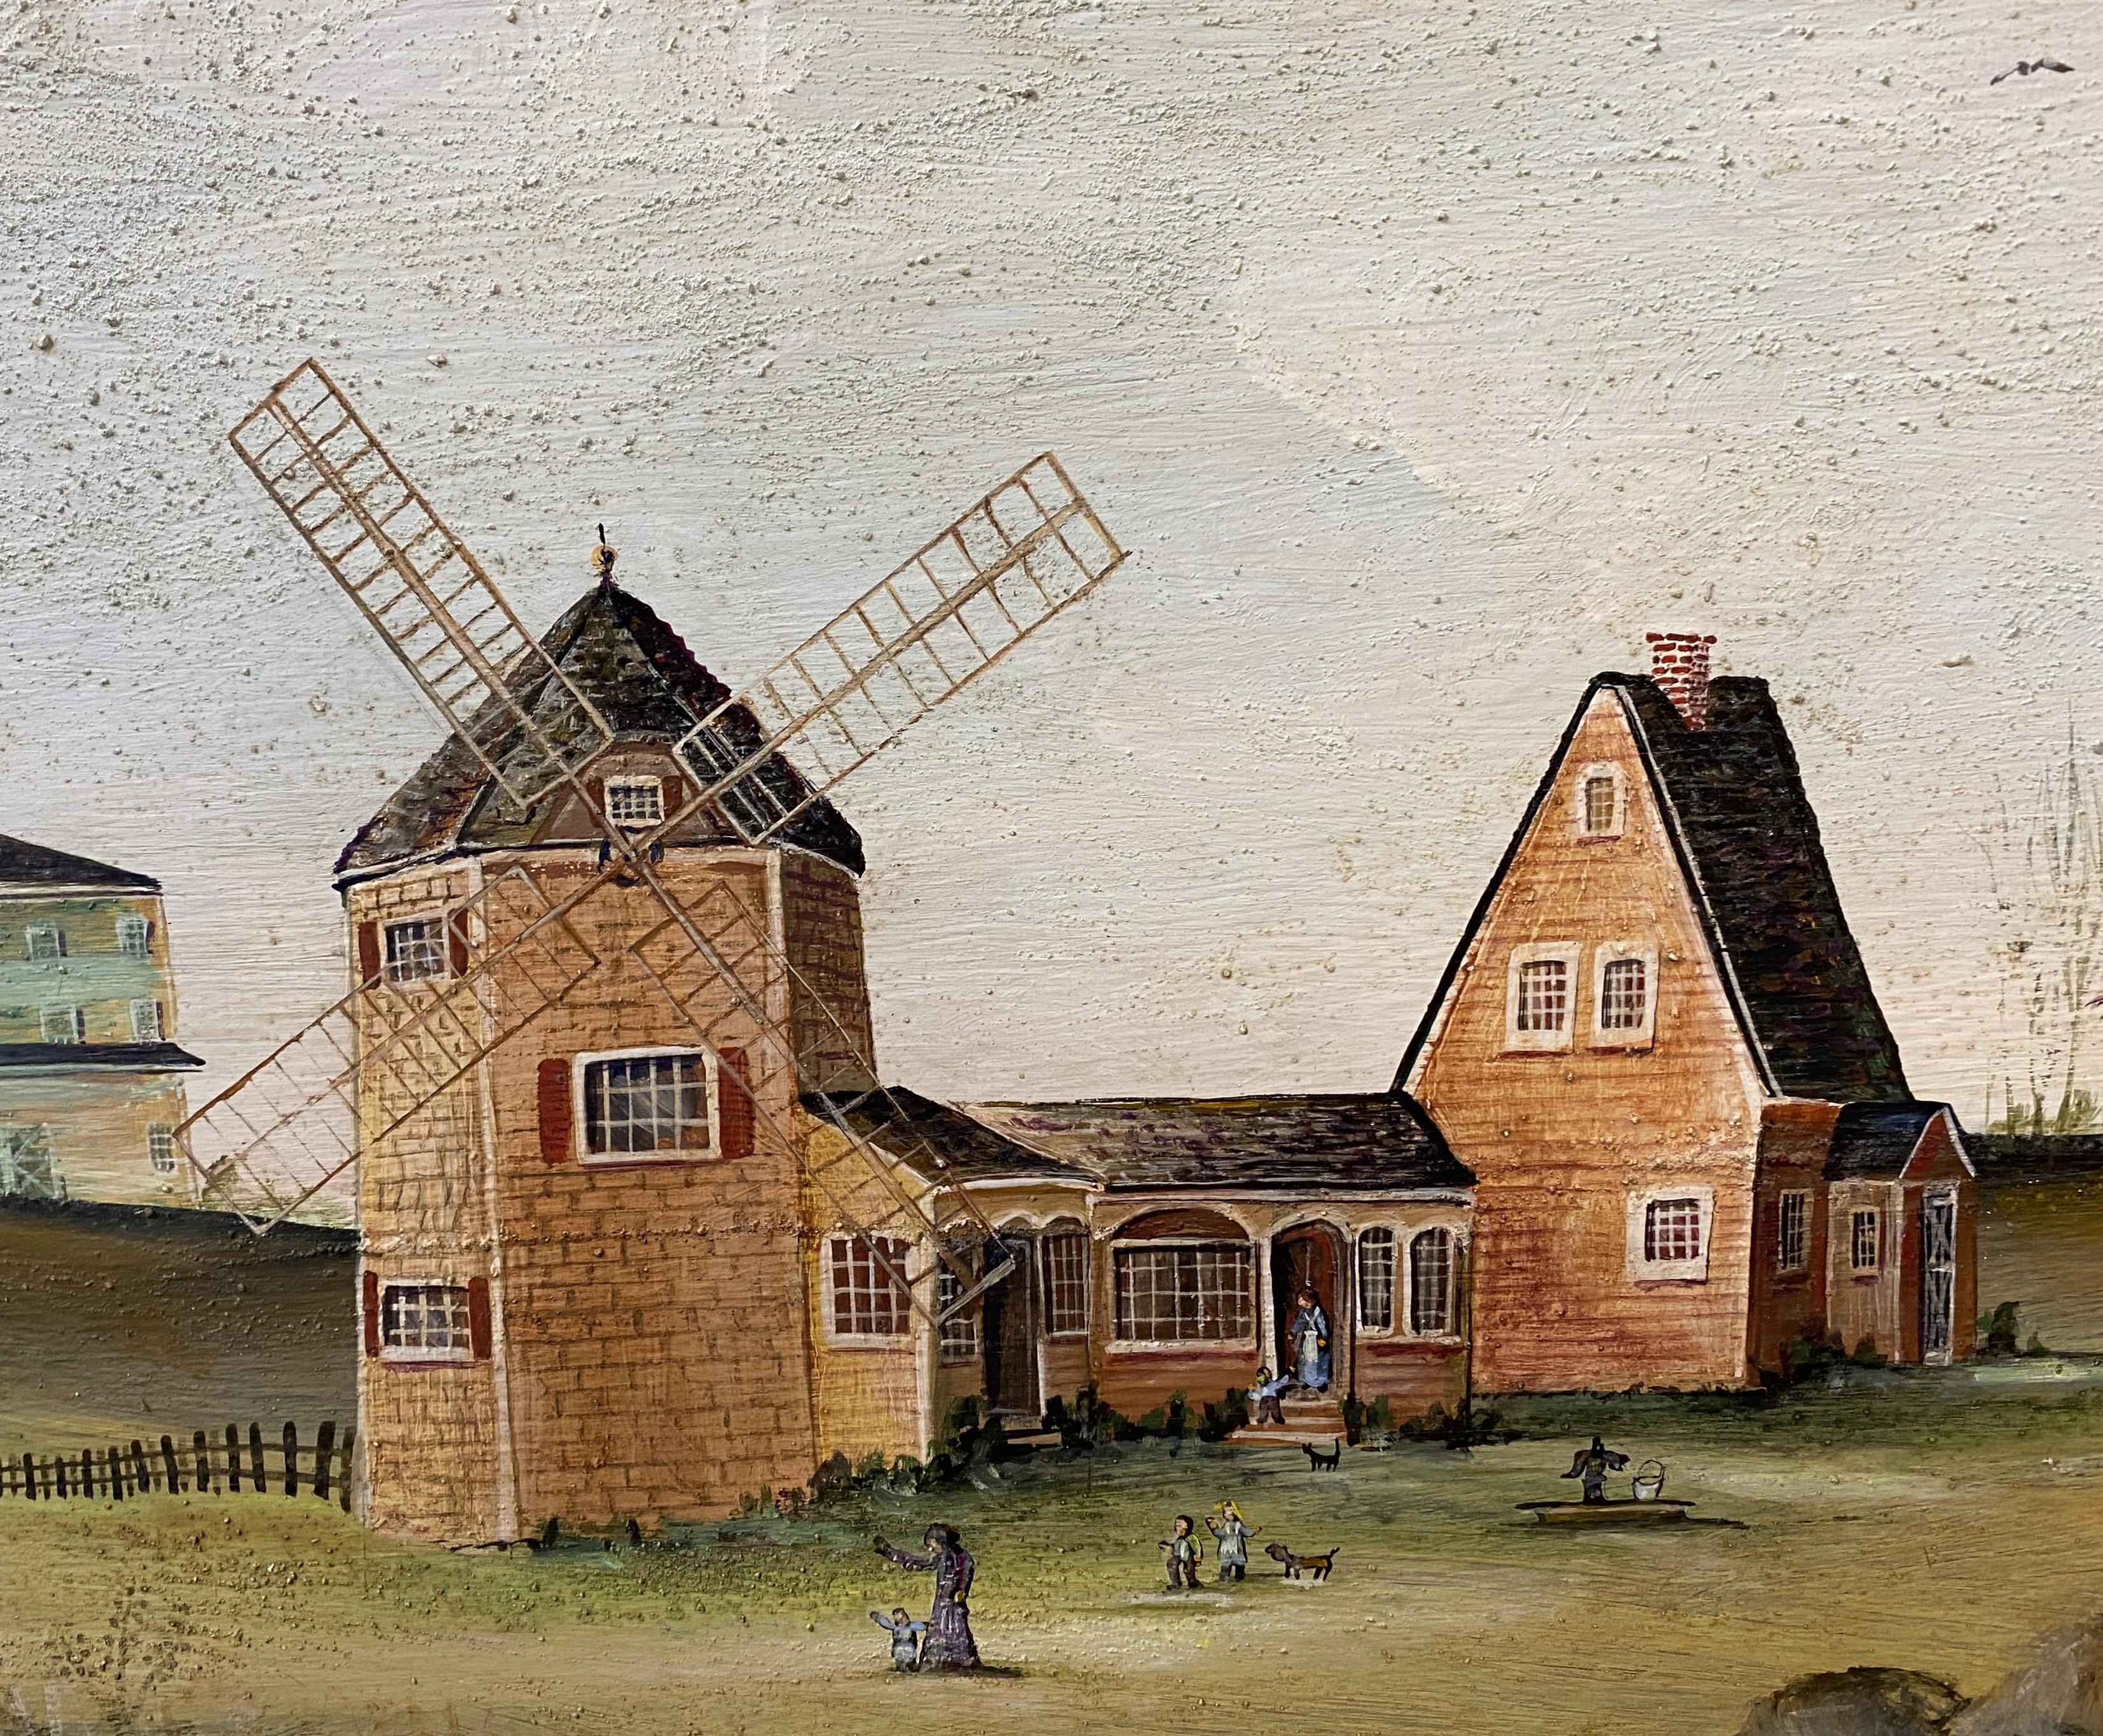 A fine naive landscape painting with a windmill by American artist Janet Munro (b. 1949). Munro was born in Woburn, MA, and her work focuses on the waterfront lives of everyday people - her favorite subjects are her native Massachusetts, New